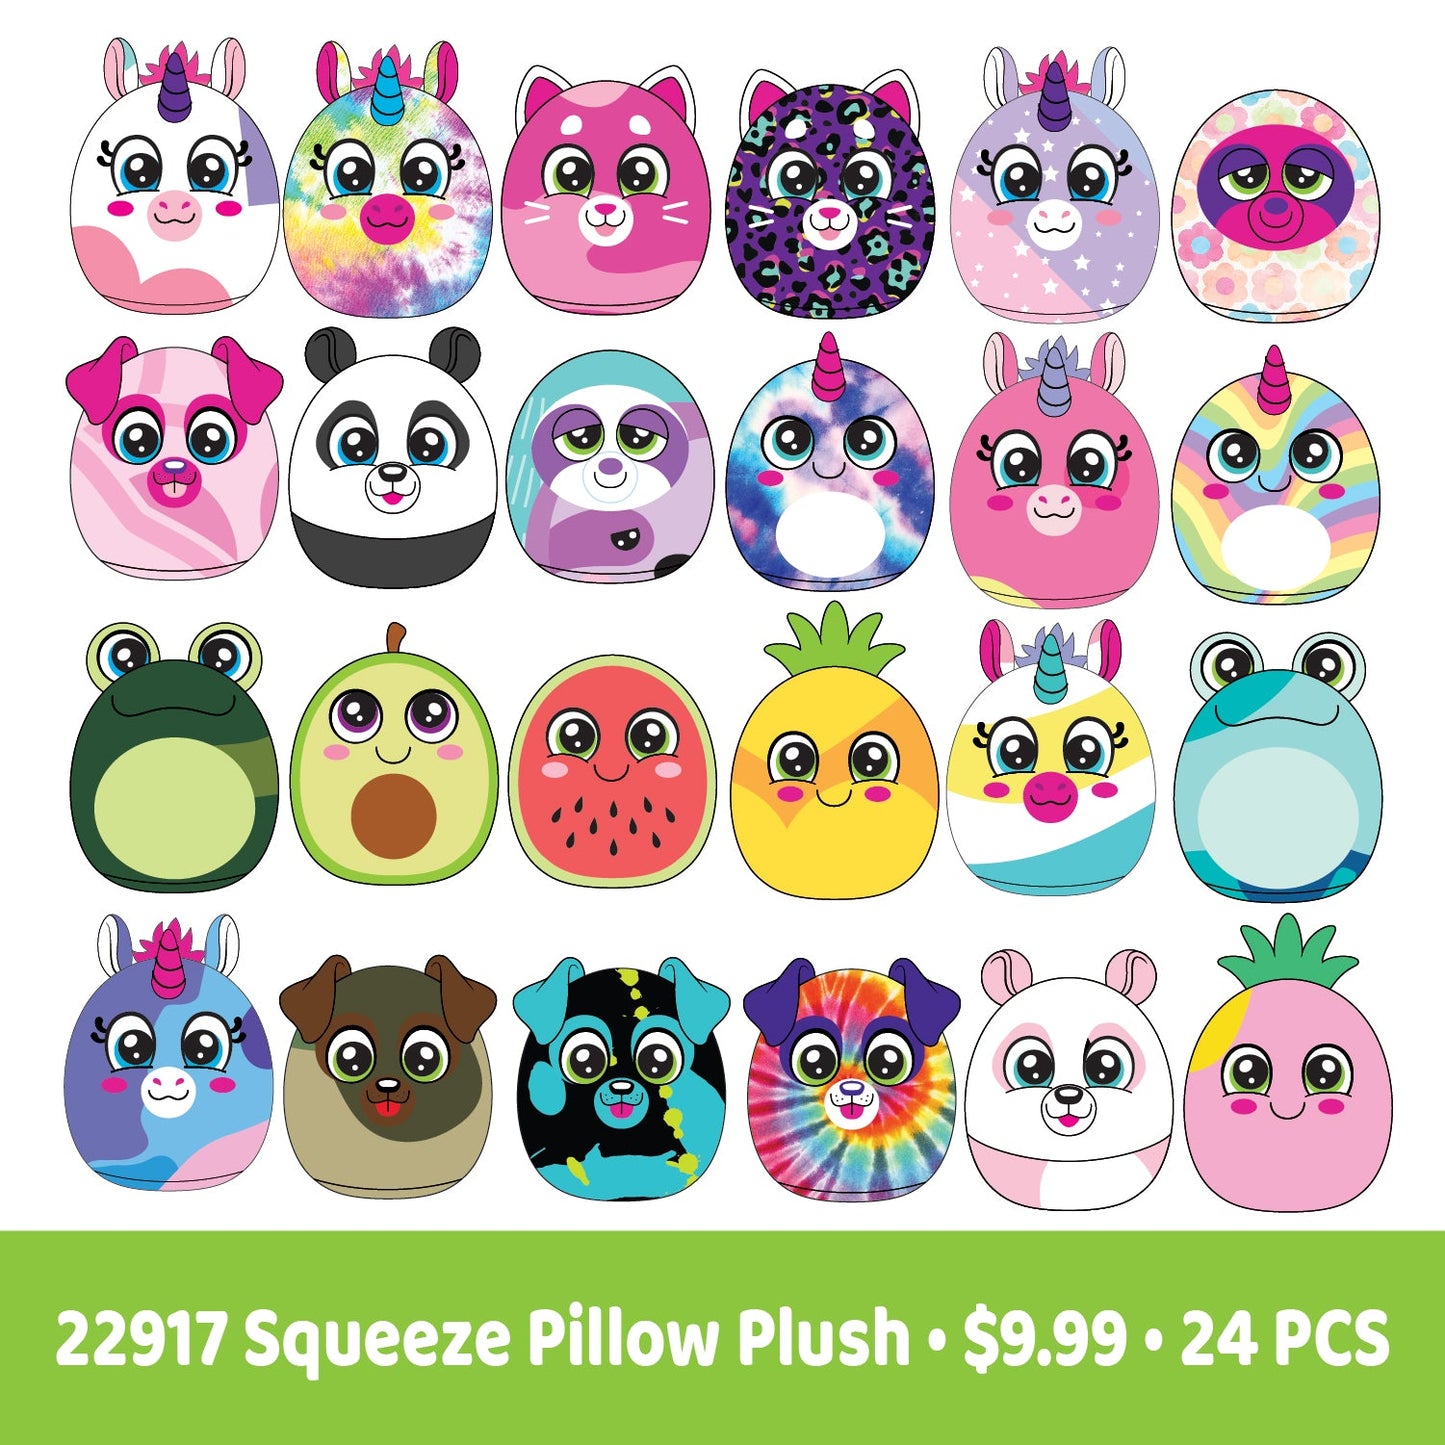 ITEM NUMBER 088375 FLUFFY STUFFY PILLOW PLUSHIE FLOOR DISPLAY 24 PIECES PER DISPLAY